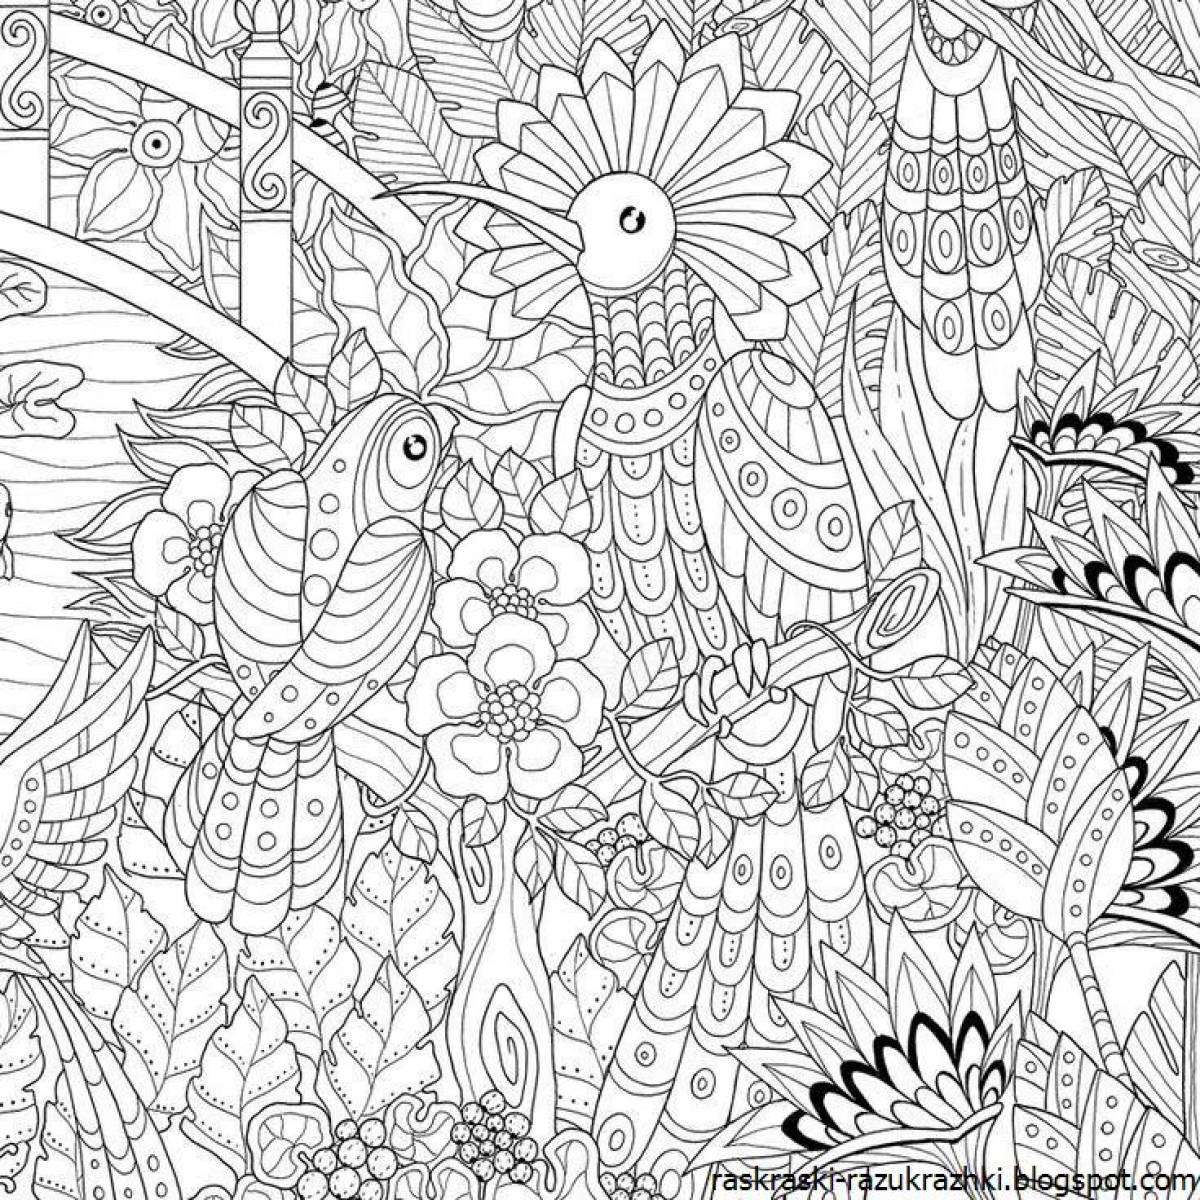 Awesome intricate coloring pages